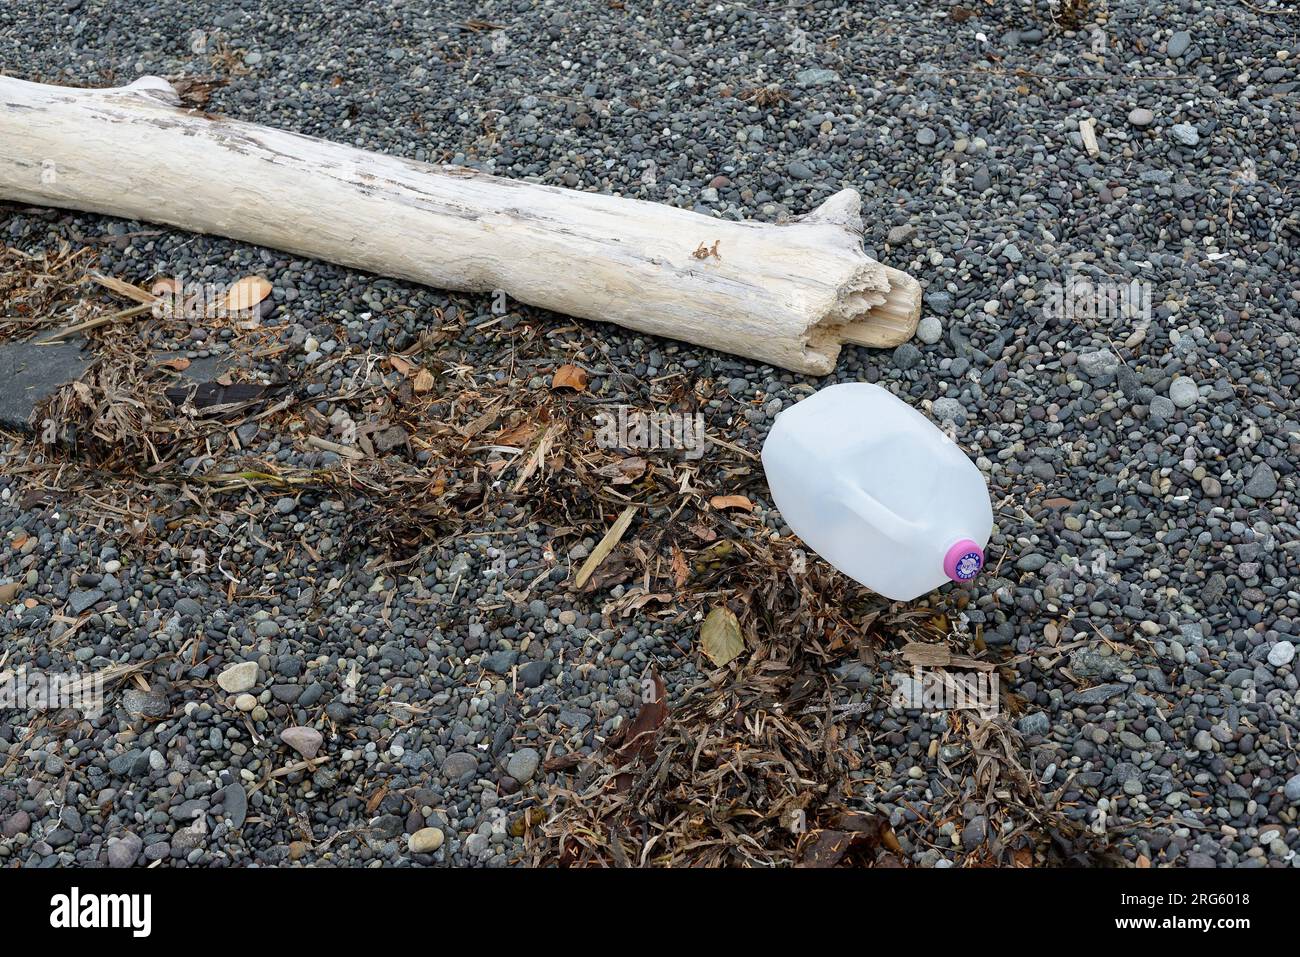 Plastic milk container and log, Vancouver Island, B.C Canada. Stock Photo